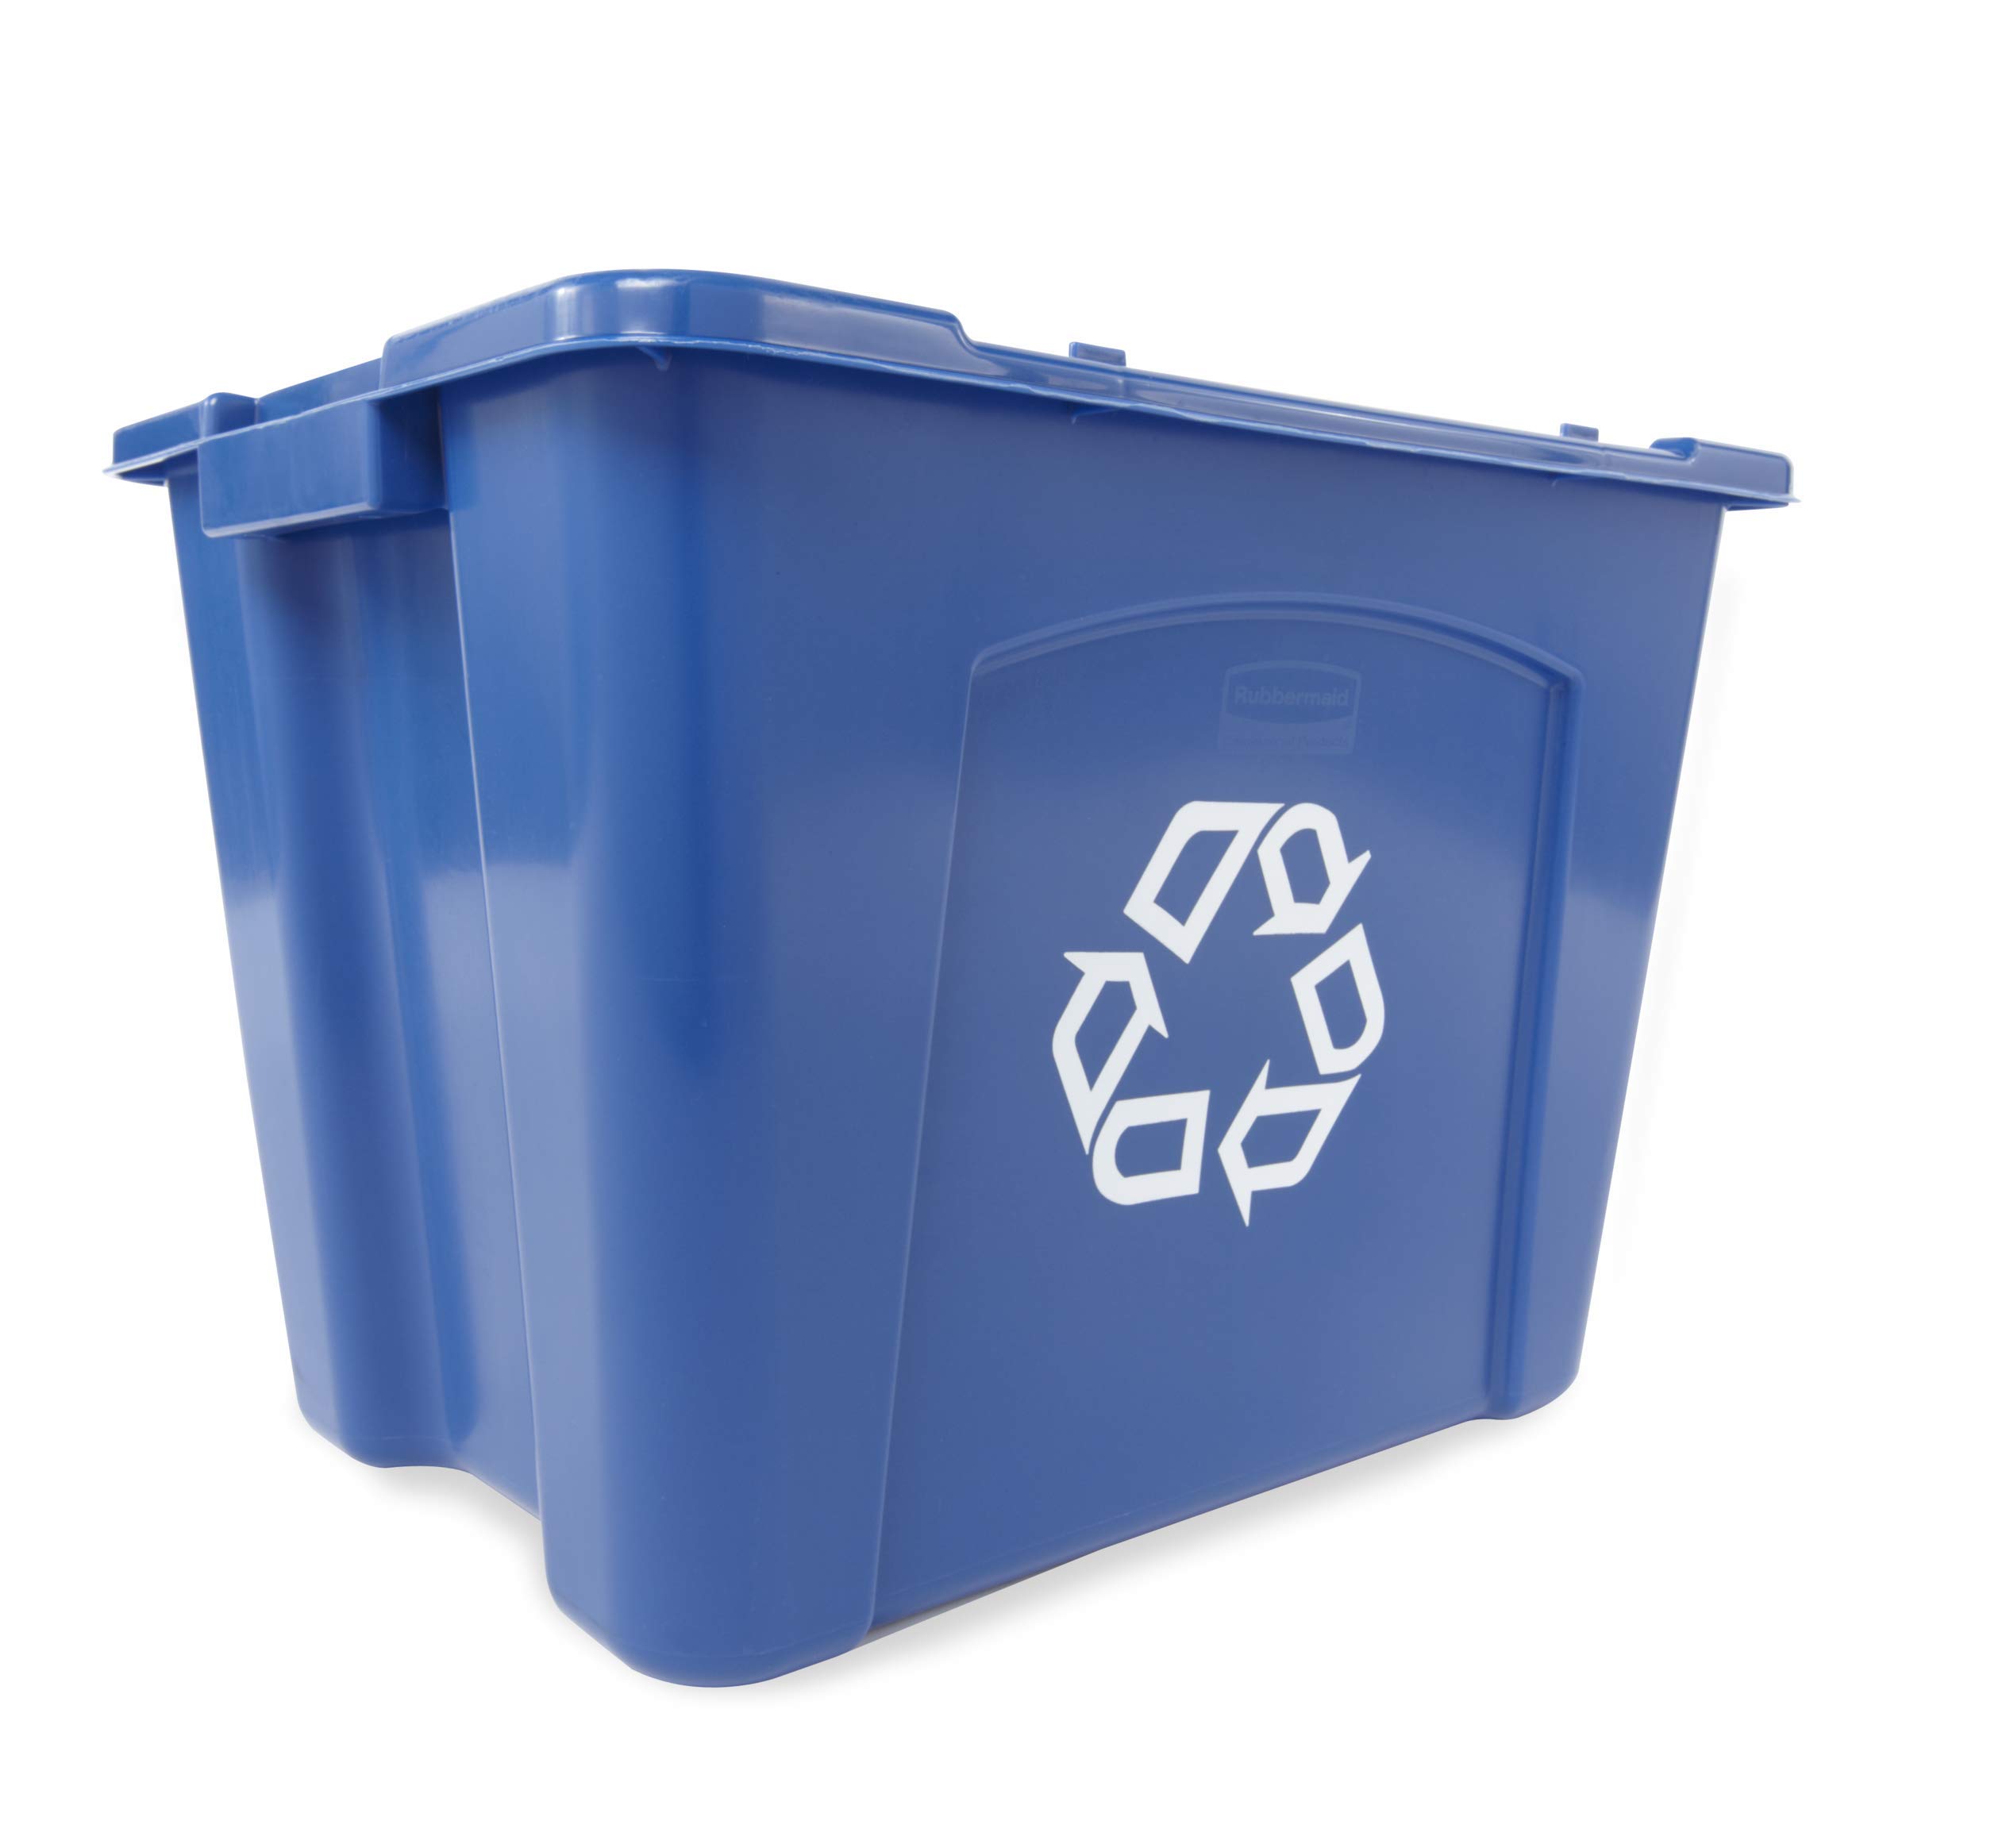 Rubbermaid Commercial Products Stackable Recycling Bin